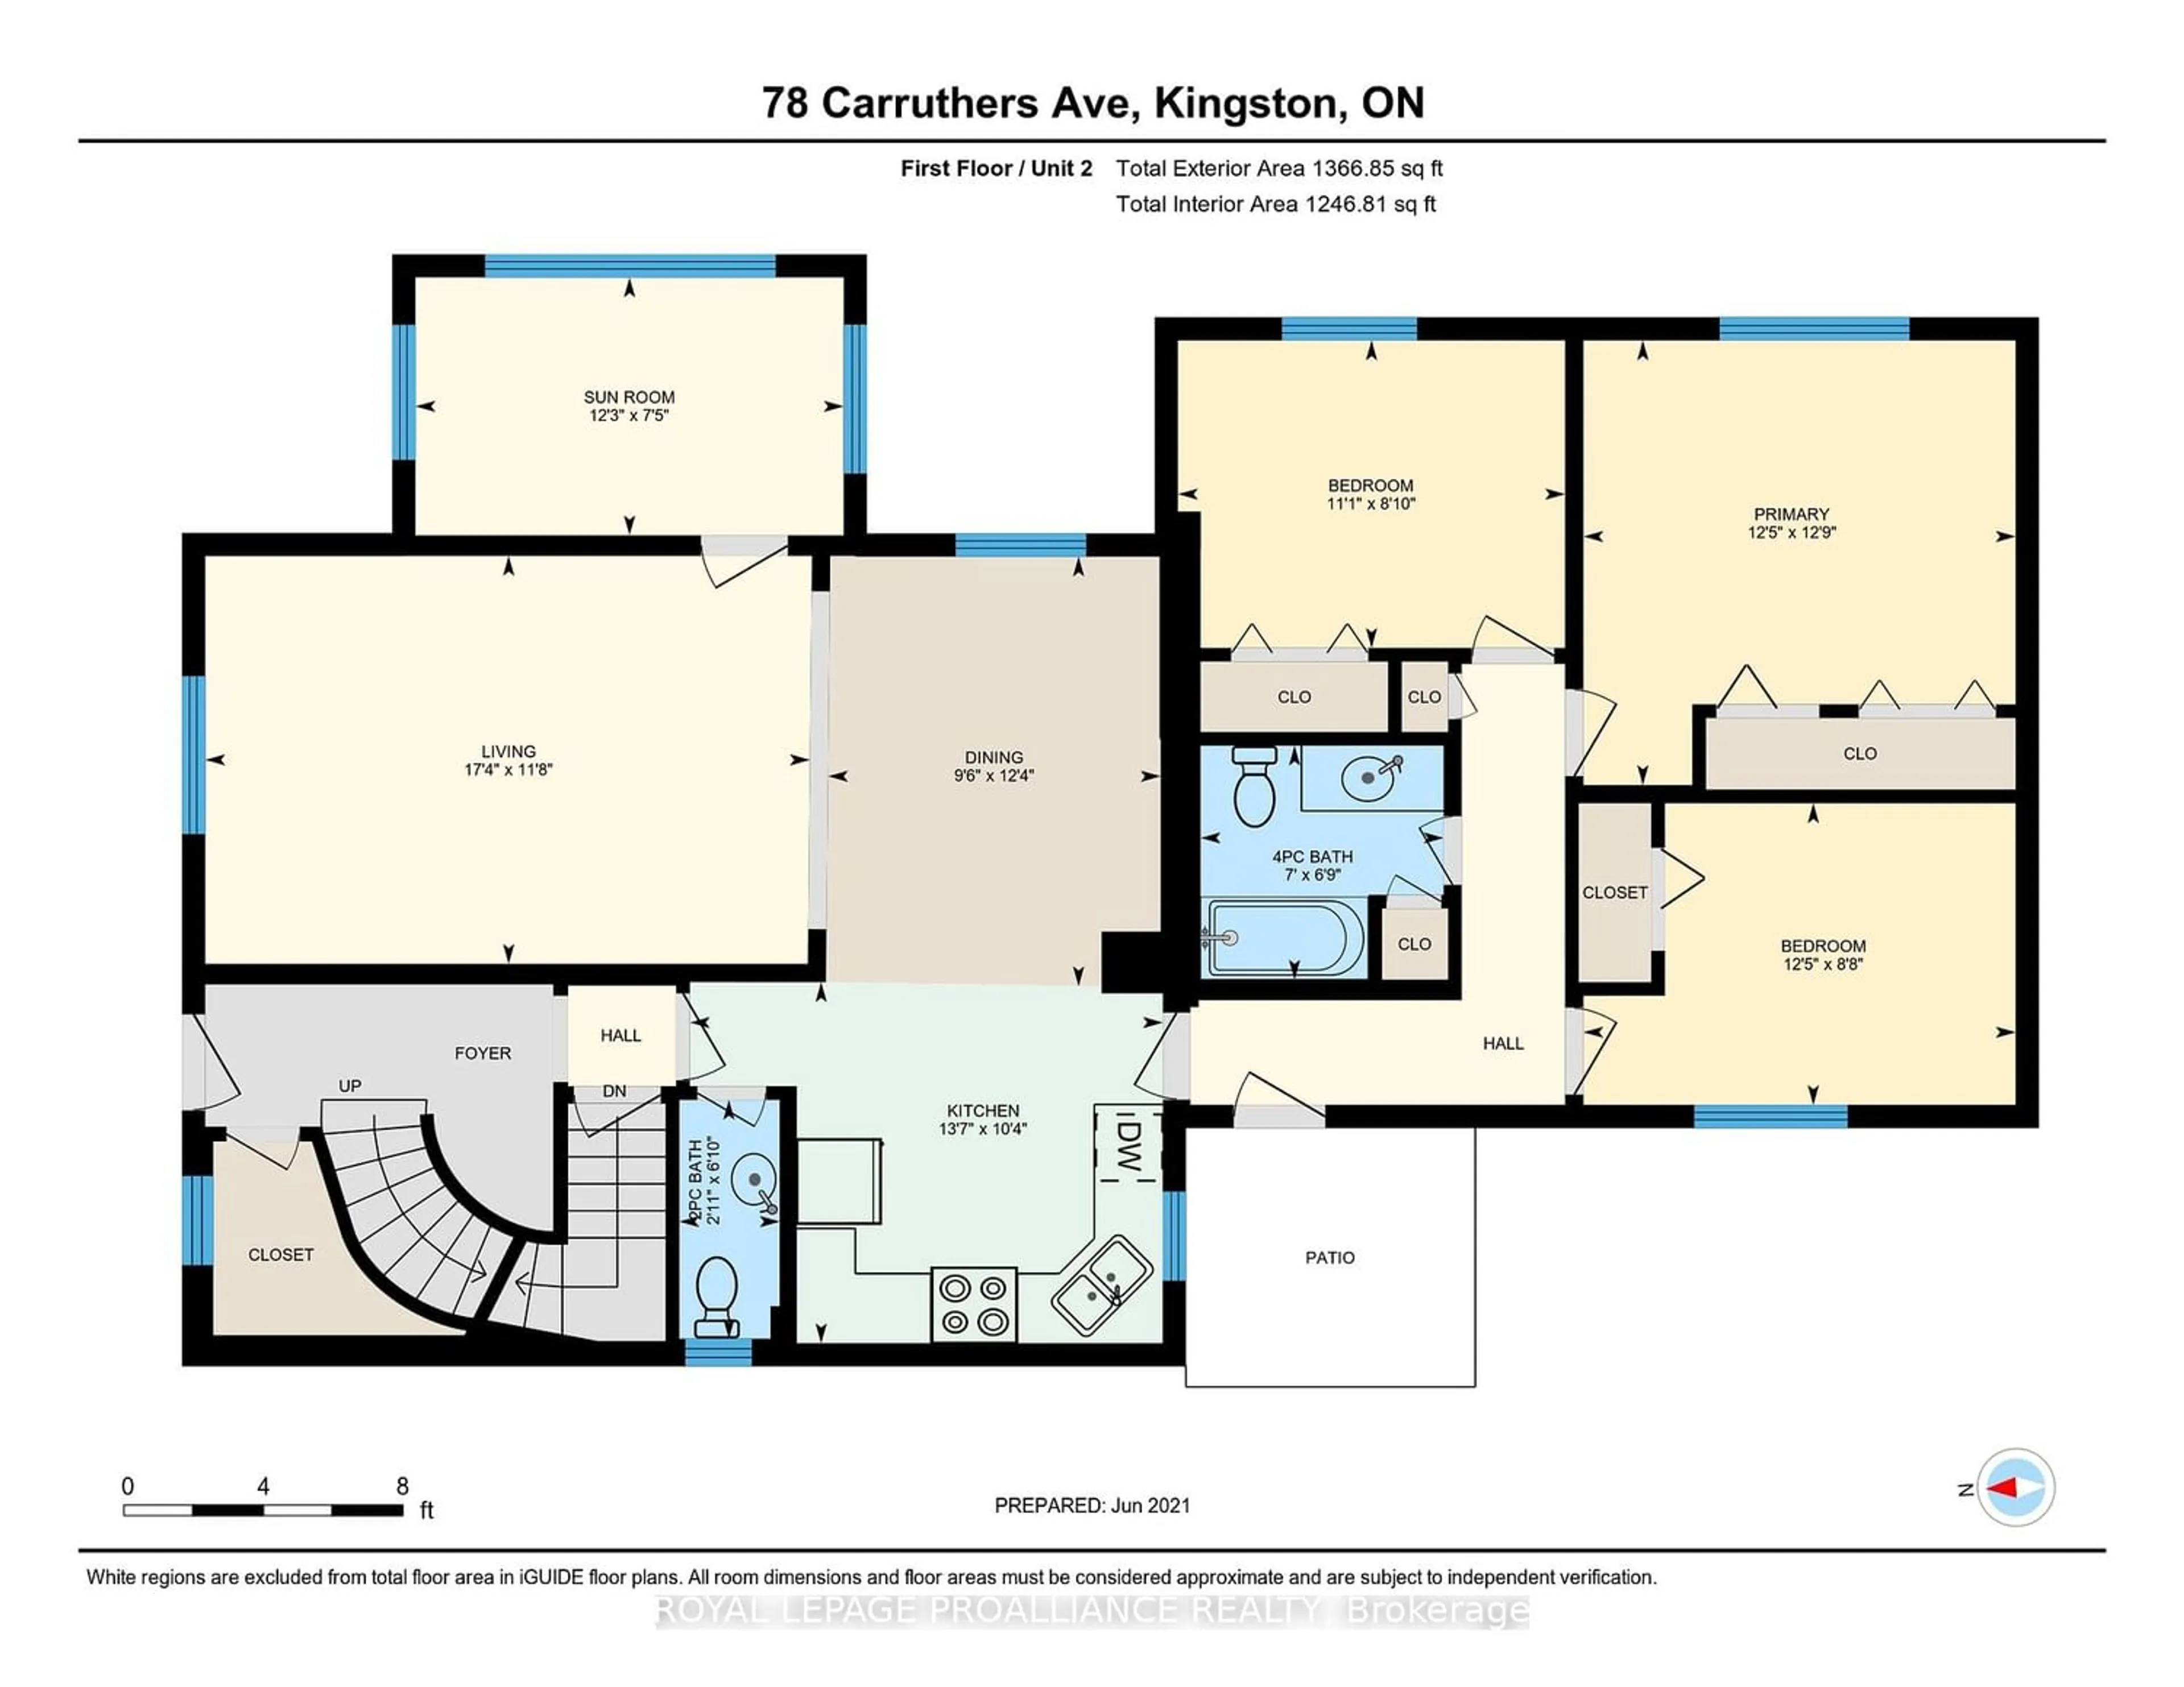 Floor plan for 78 Carruthers Ave, Kingston Ontario K7L 1M4